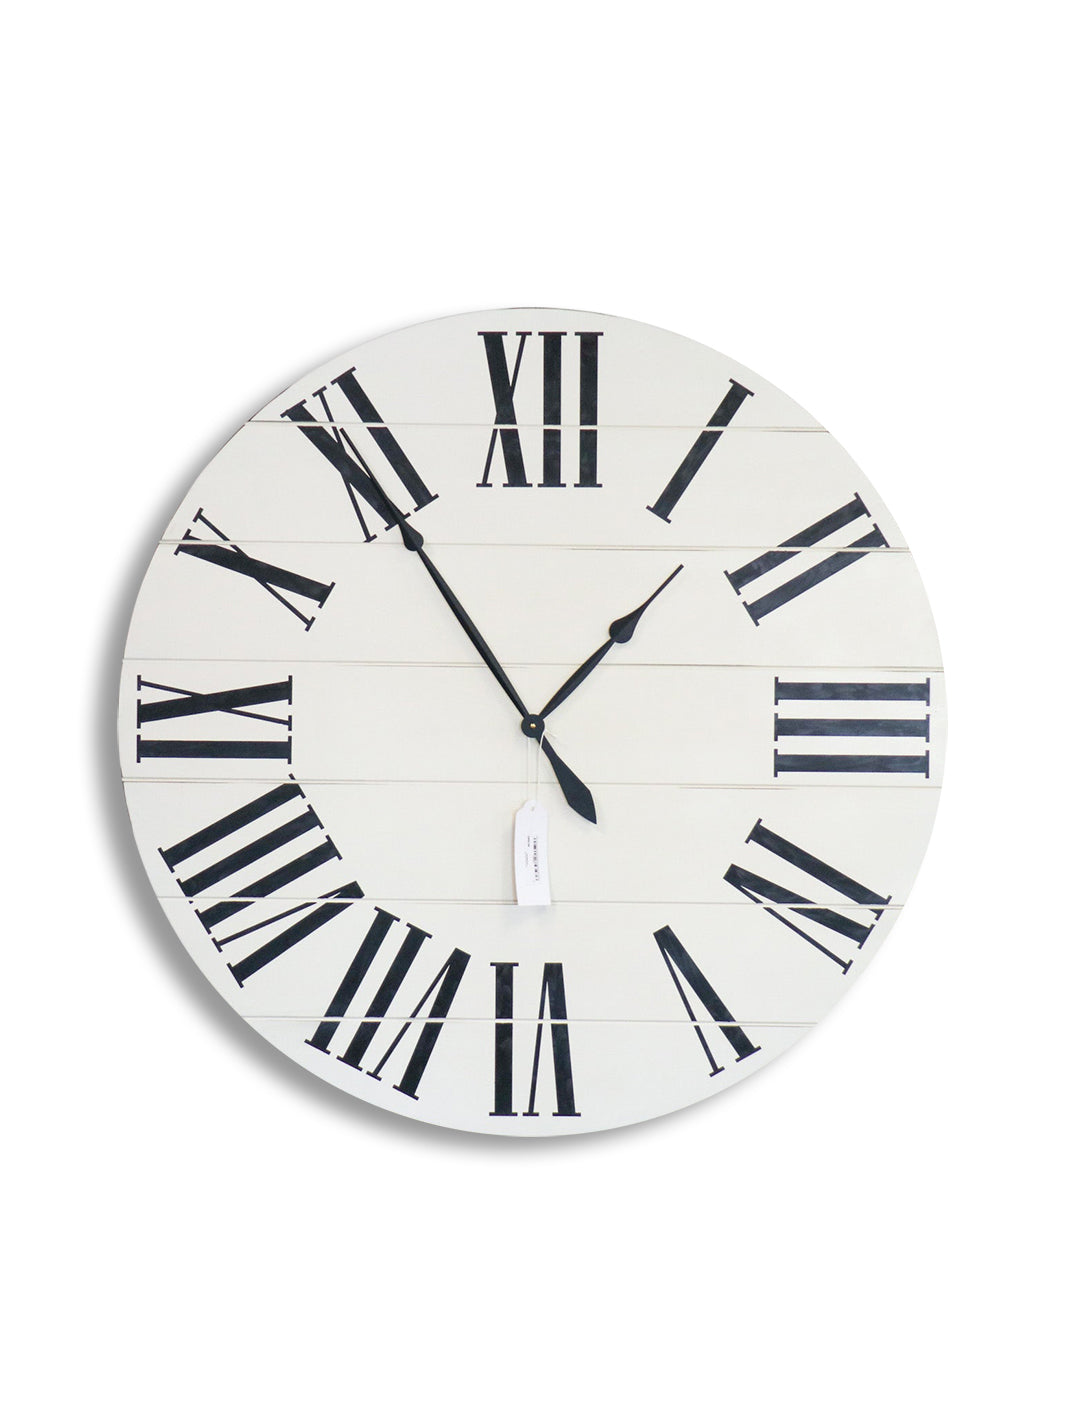 Simple 42" Farmhouse Style Large White Distressed Wall Clock with Black Roman Numerals (in stock)